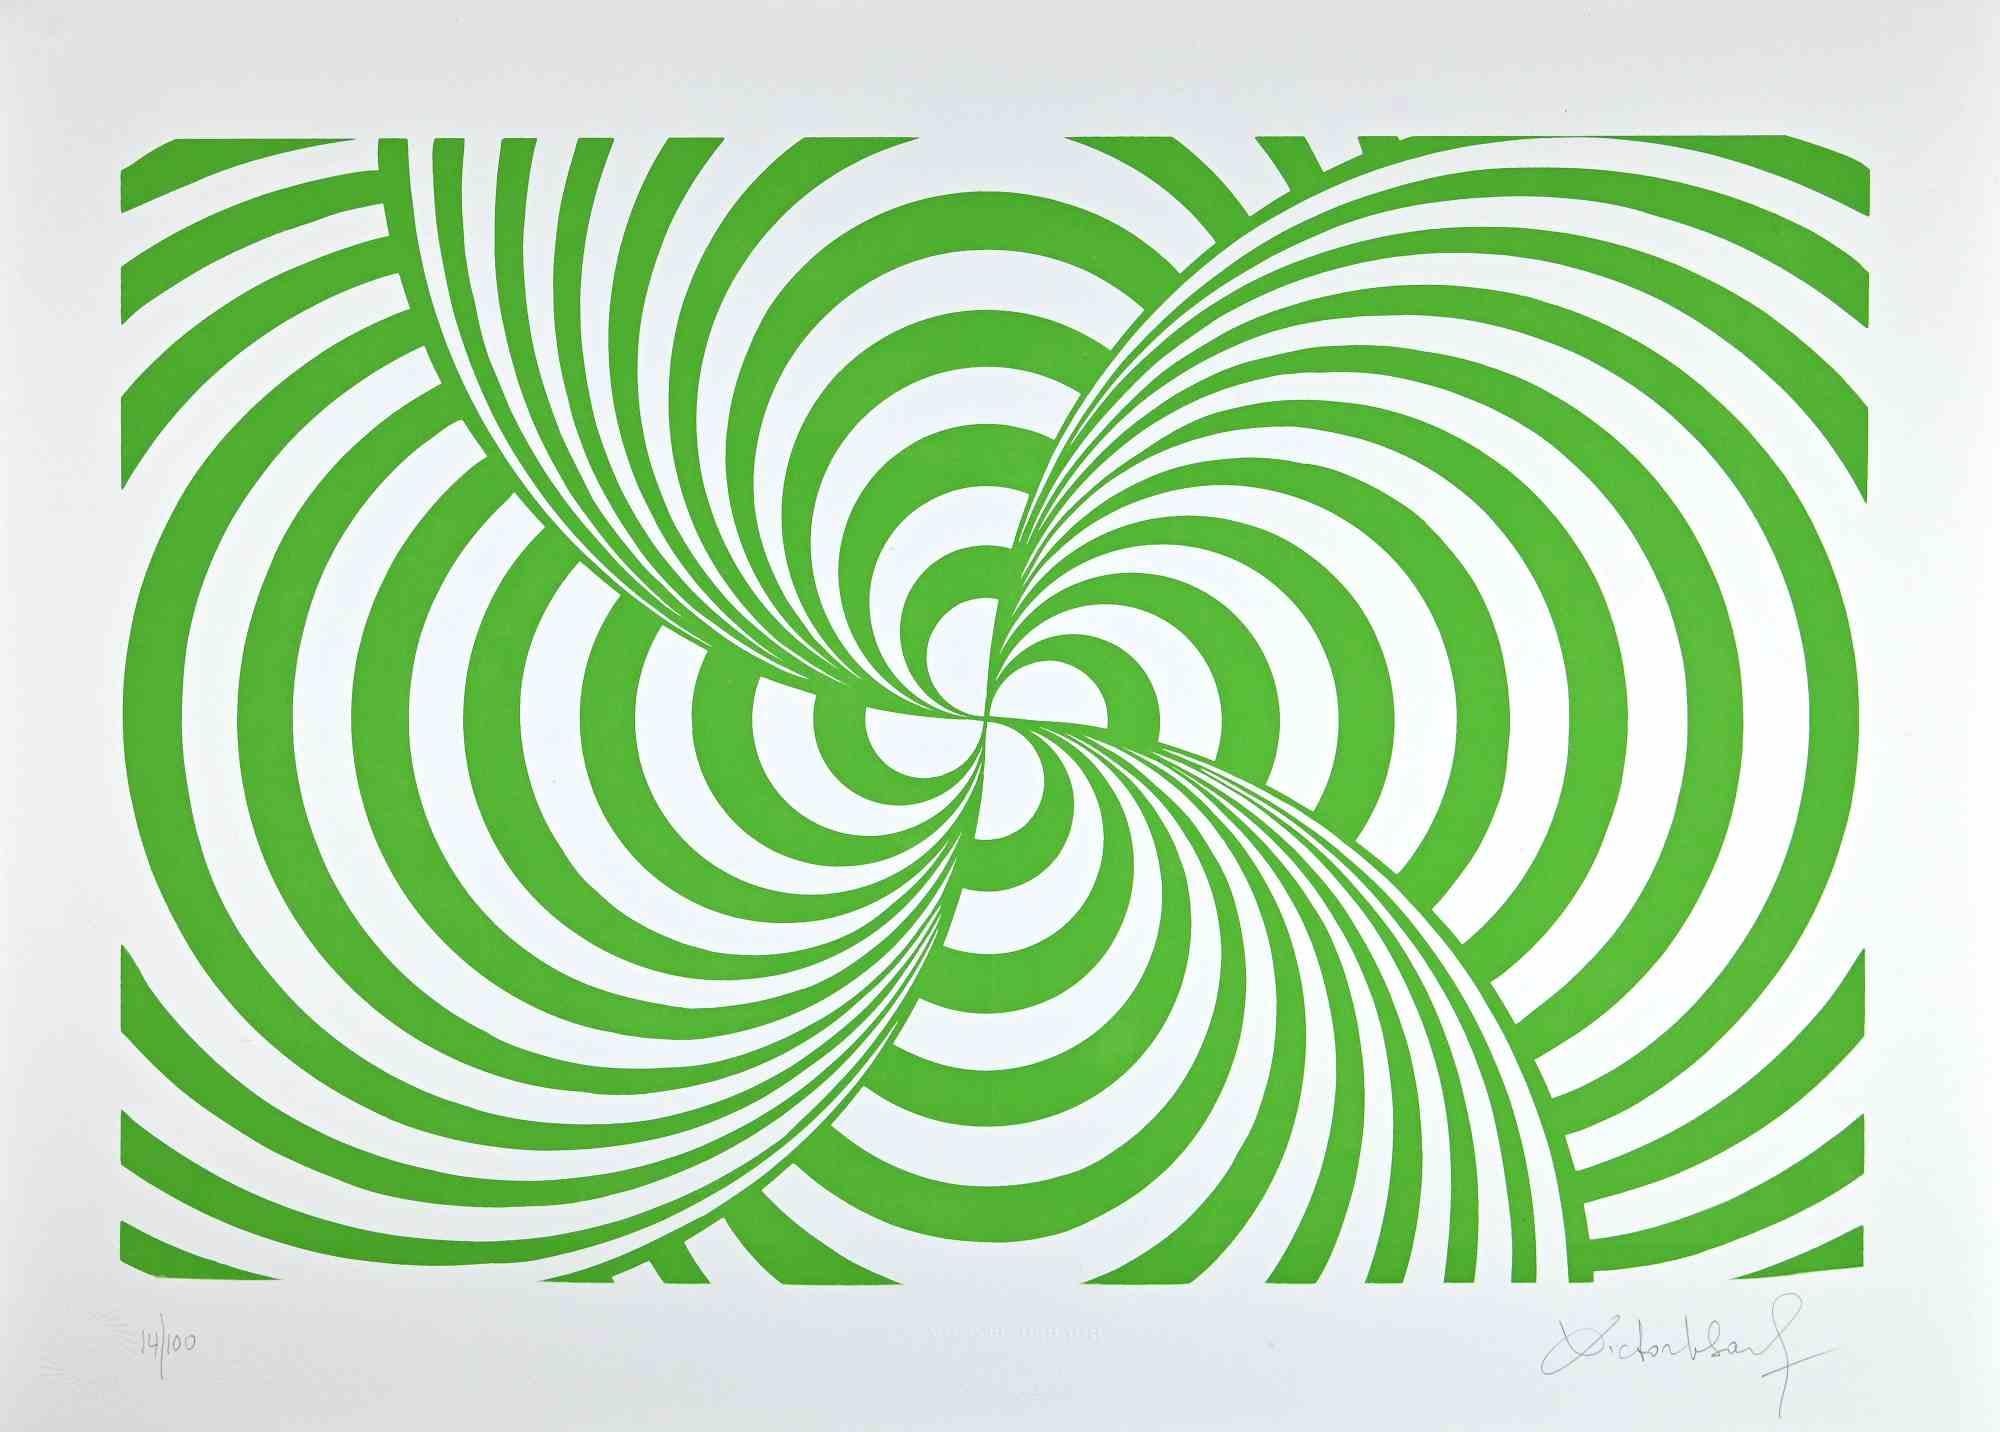 Abstract Green Composition is a Screen Print on Paper realized by Victor Debach in 1970s.

Limited edition of 100 copies numbered and signed by the artist with pencil on the lower margin.

Very good condition on a white cardboard.

